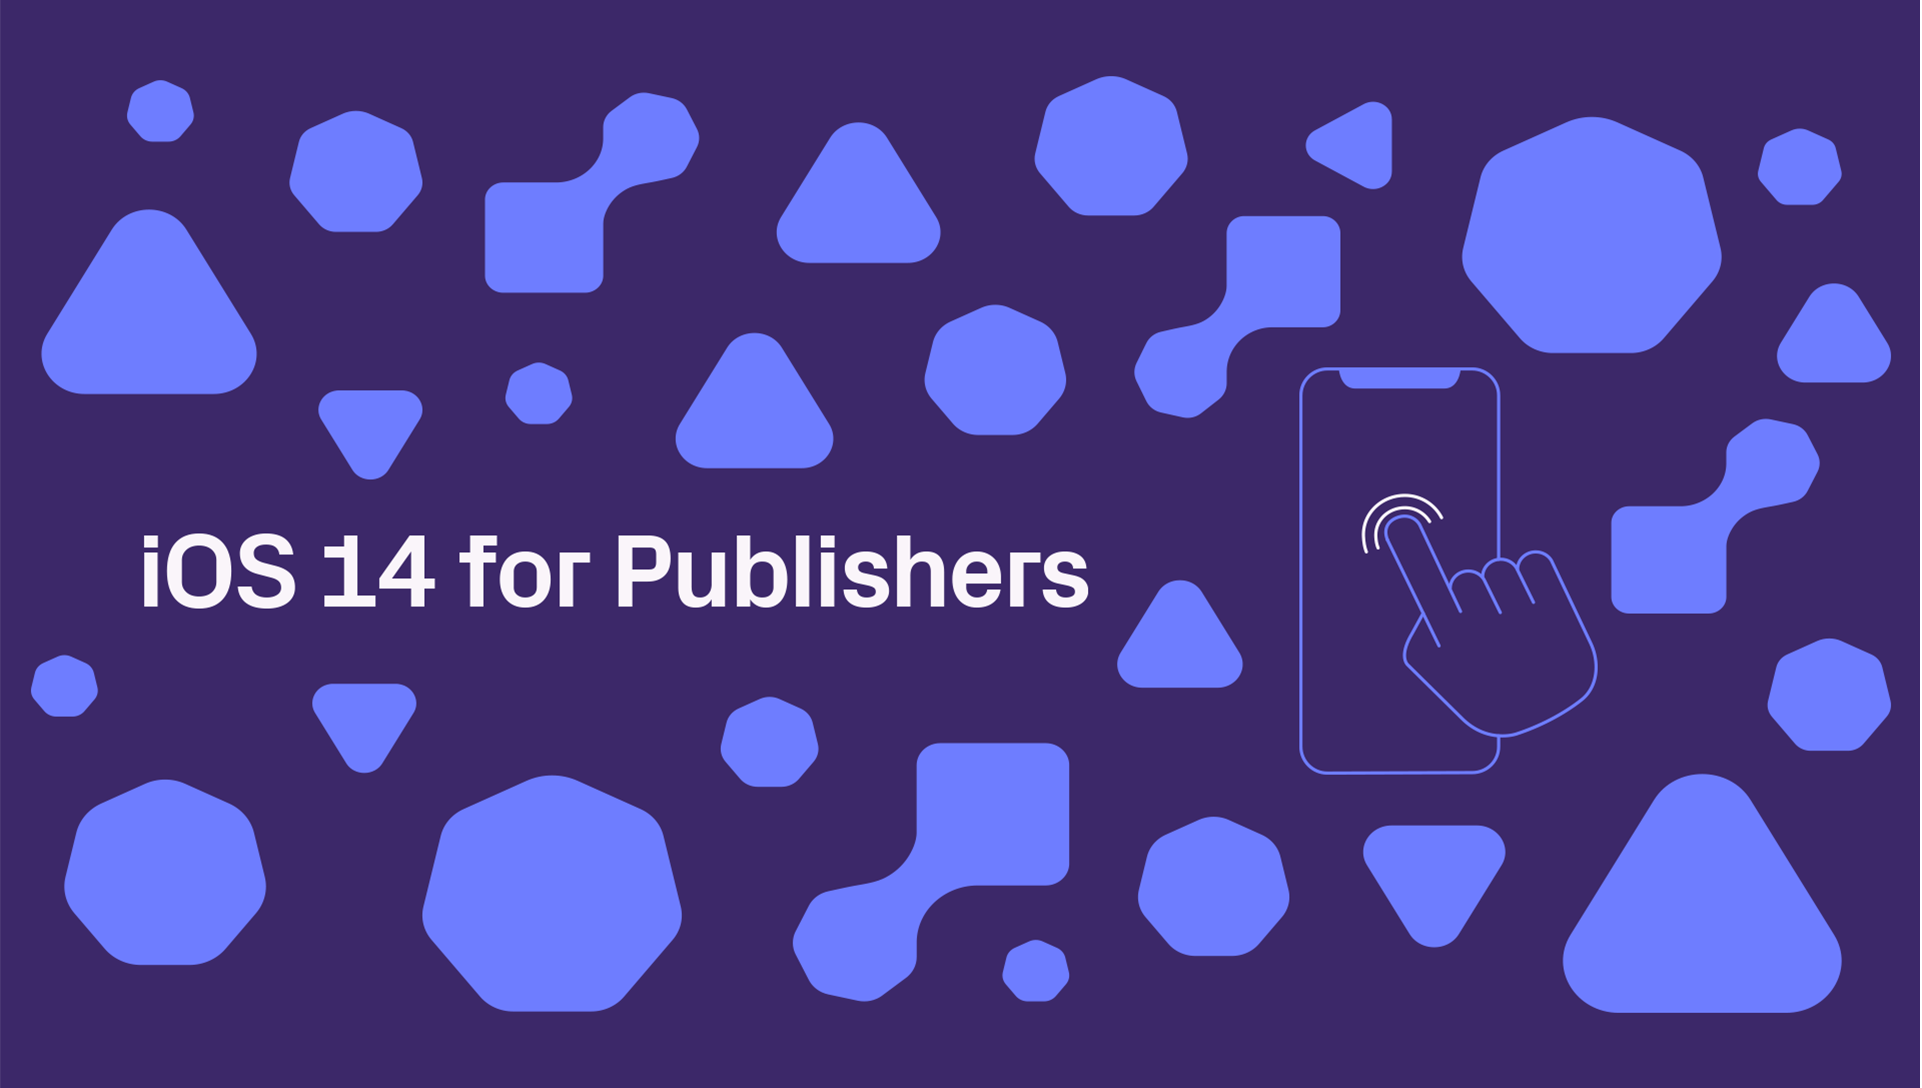 Introduction to iOS 14: How This Affects Publishers